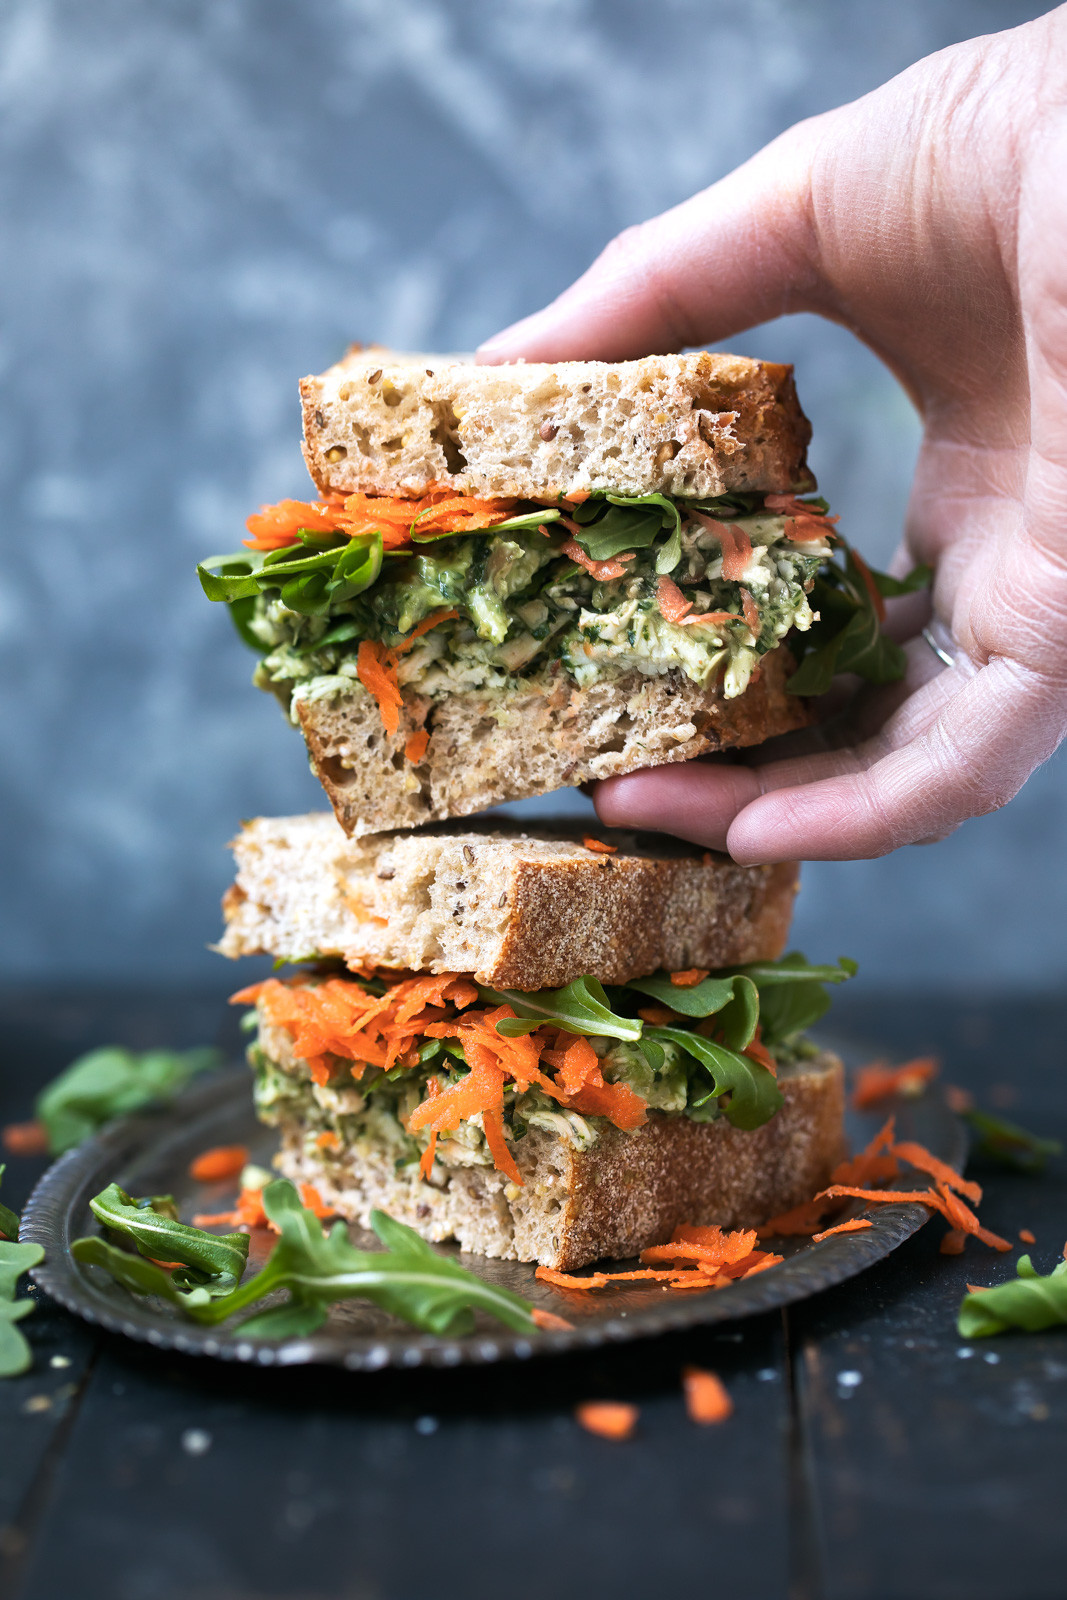 Healthy Side Dishes For Sandwiches
 Healthy Pumpkin Seed & Avocado Pesto Chicken Salad